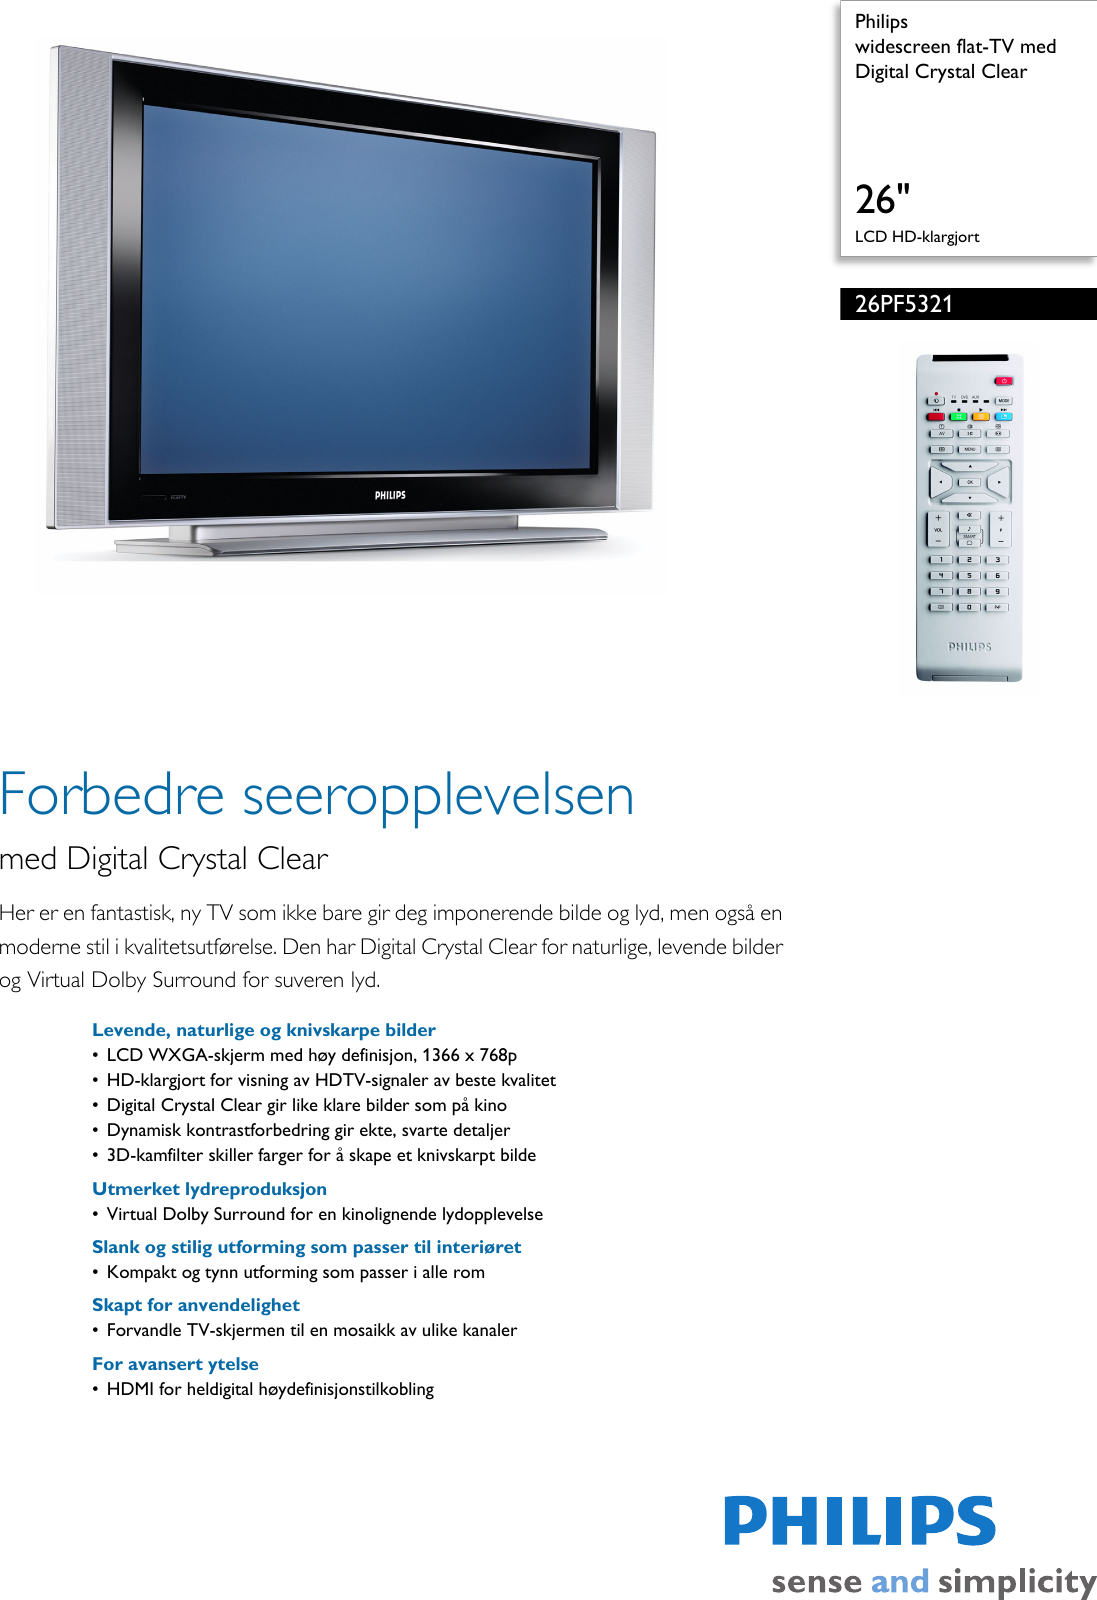 Page 1 of 3 - Philips 26PF5321/12 Widescreen Flat-TV Med Digital Crystal Clear User Manual Hefte 26pf5321 12 Pss Norno